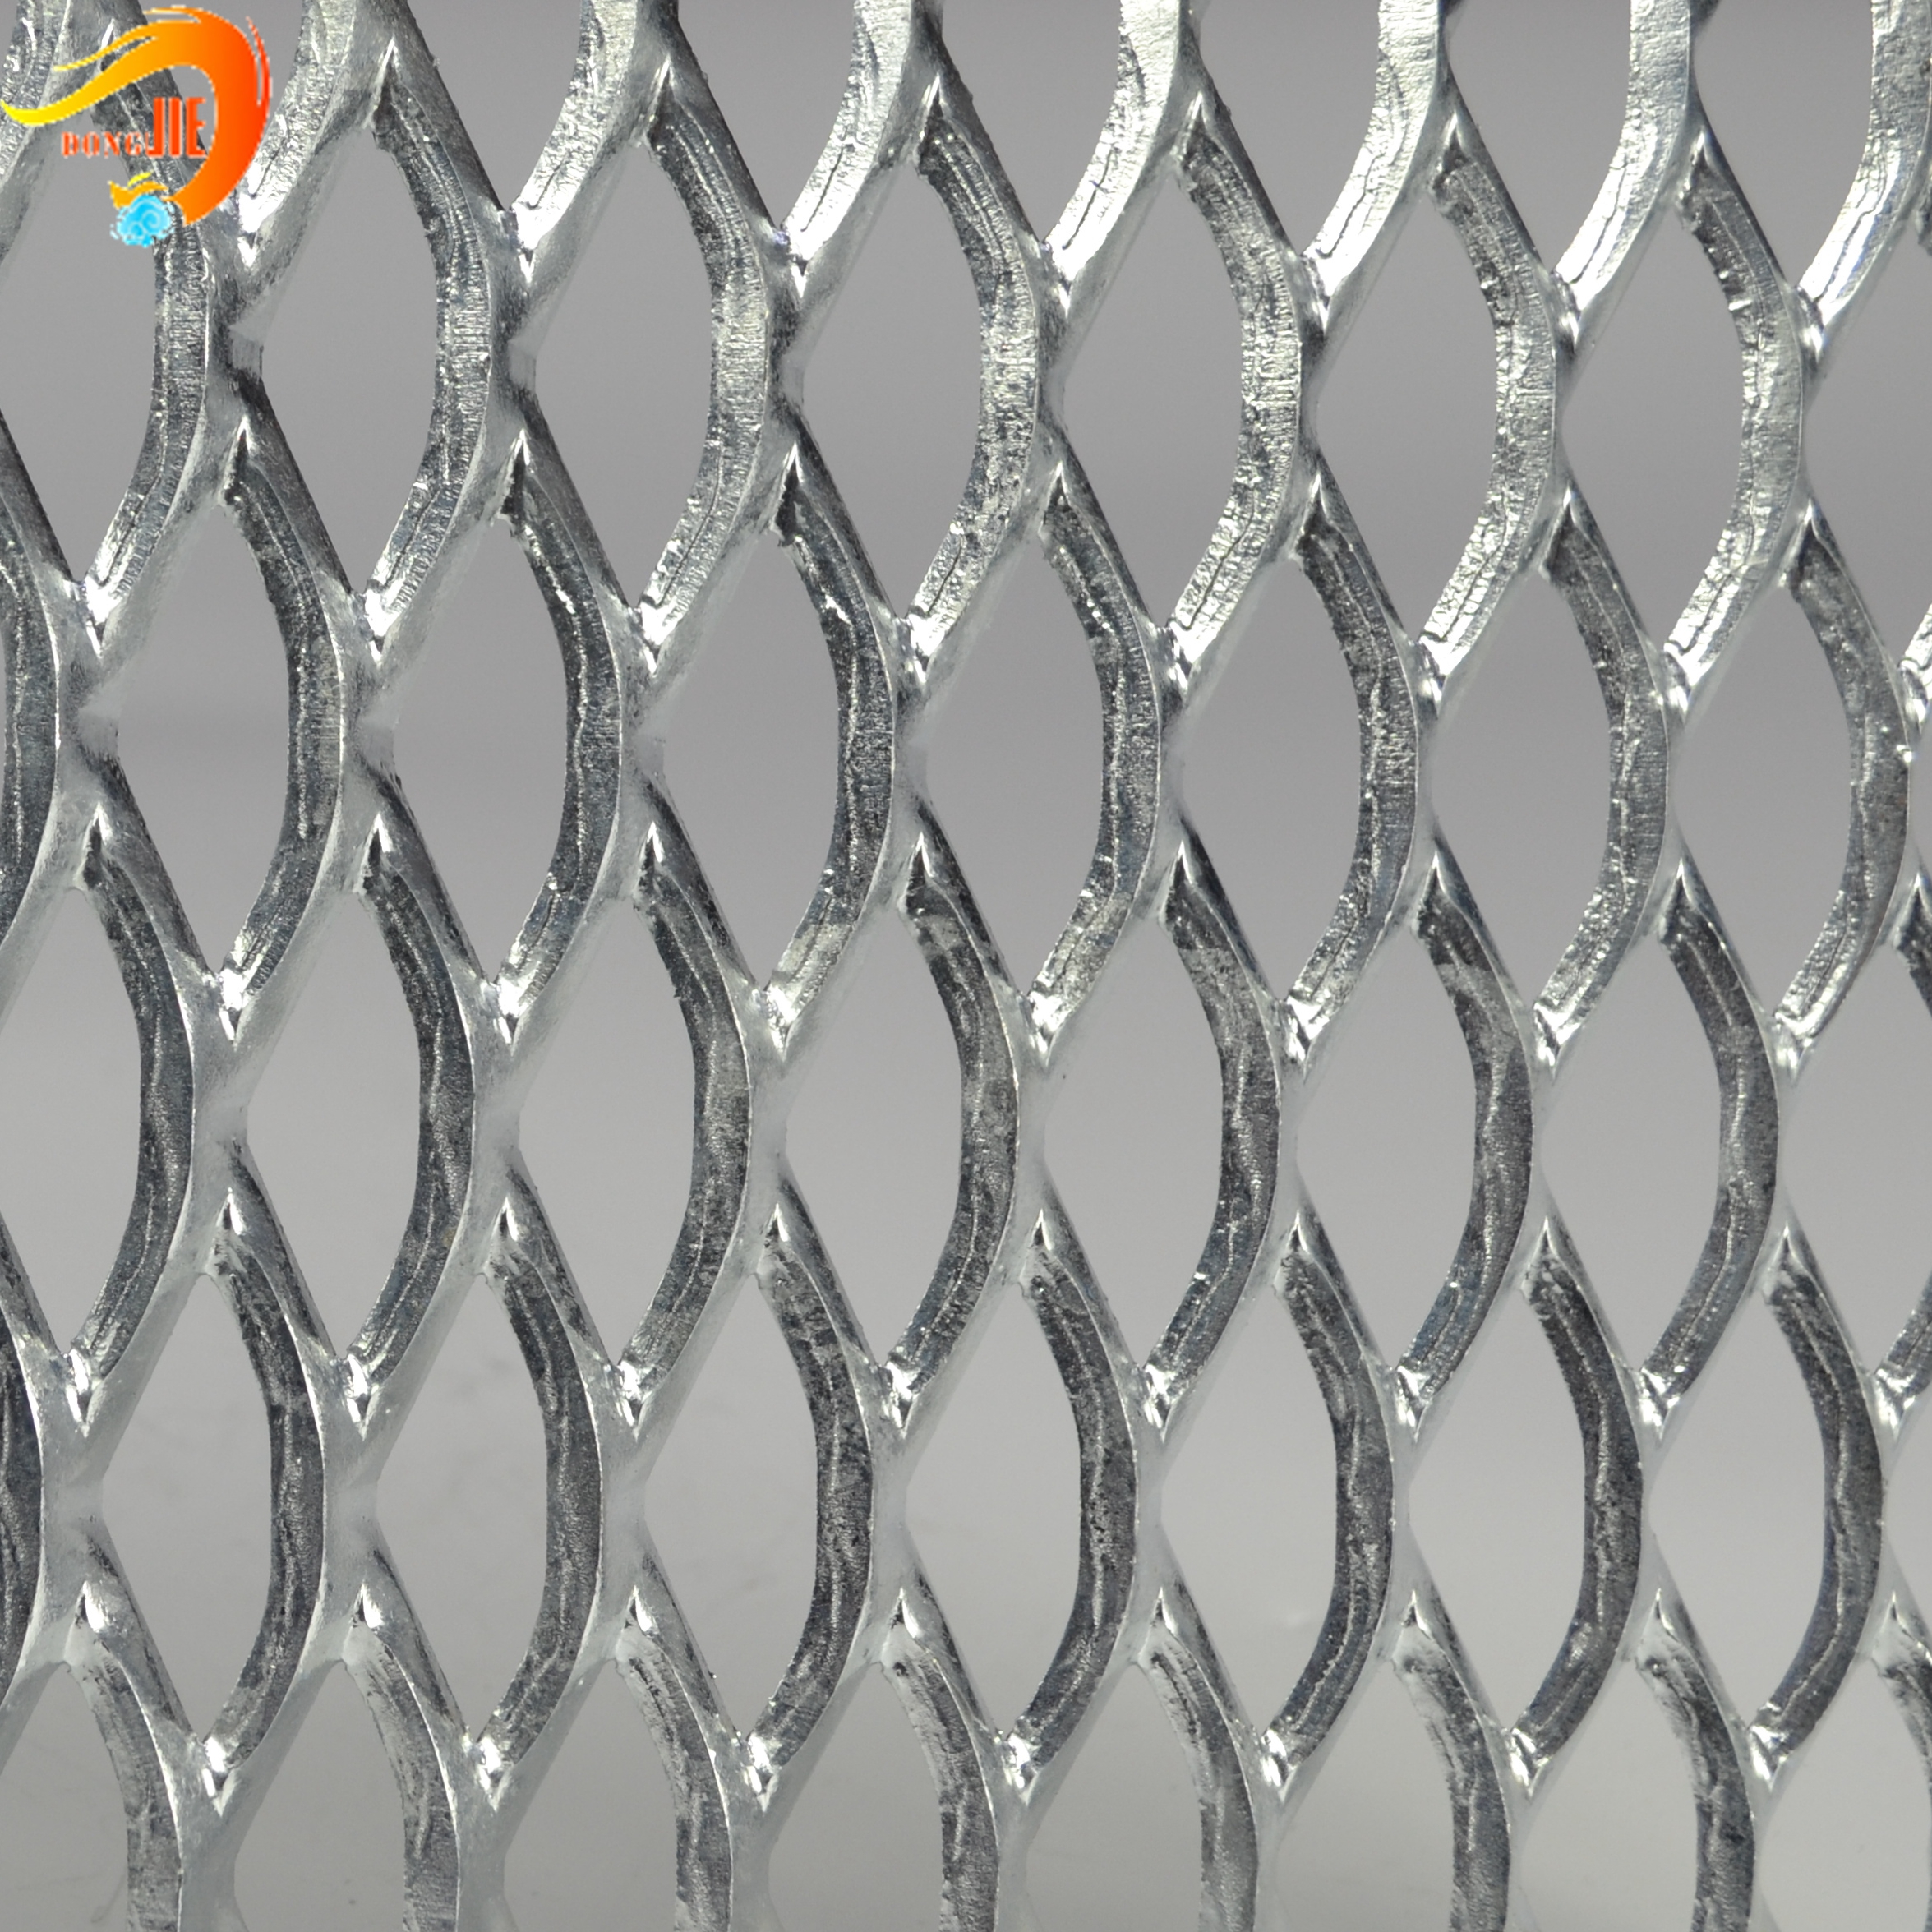 Expanded Metal Fence,China Expanded Metal,China Expanded Steel,Wholesale Expanded Steel,Wholesale Expanded Metal